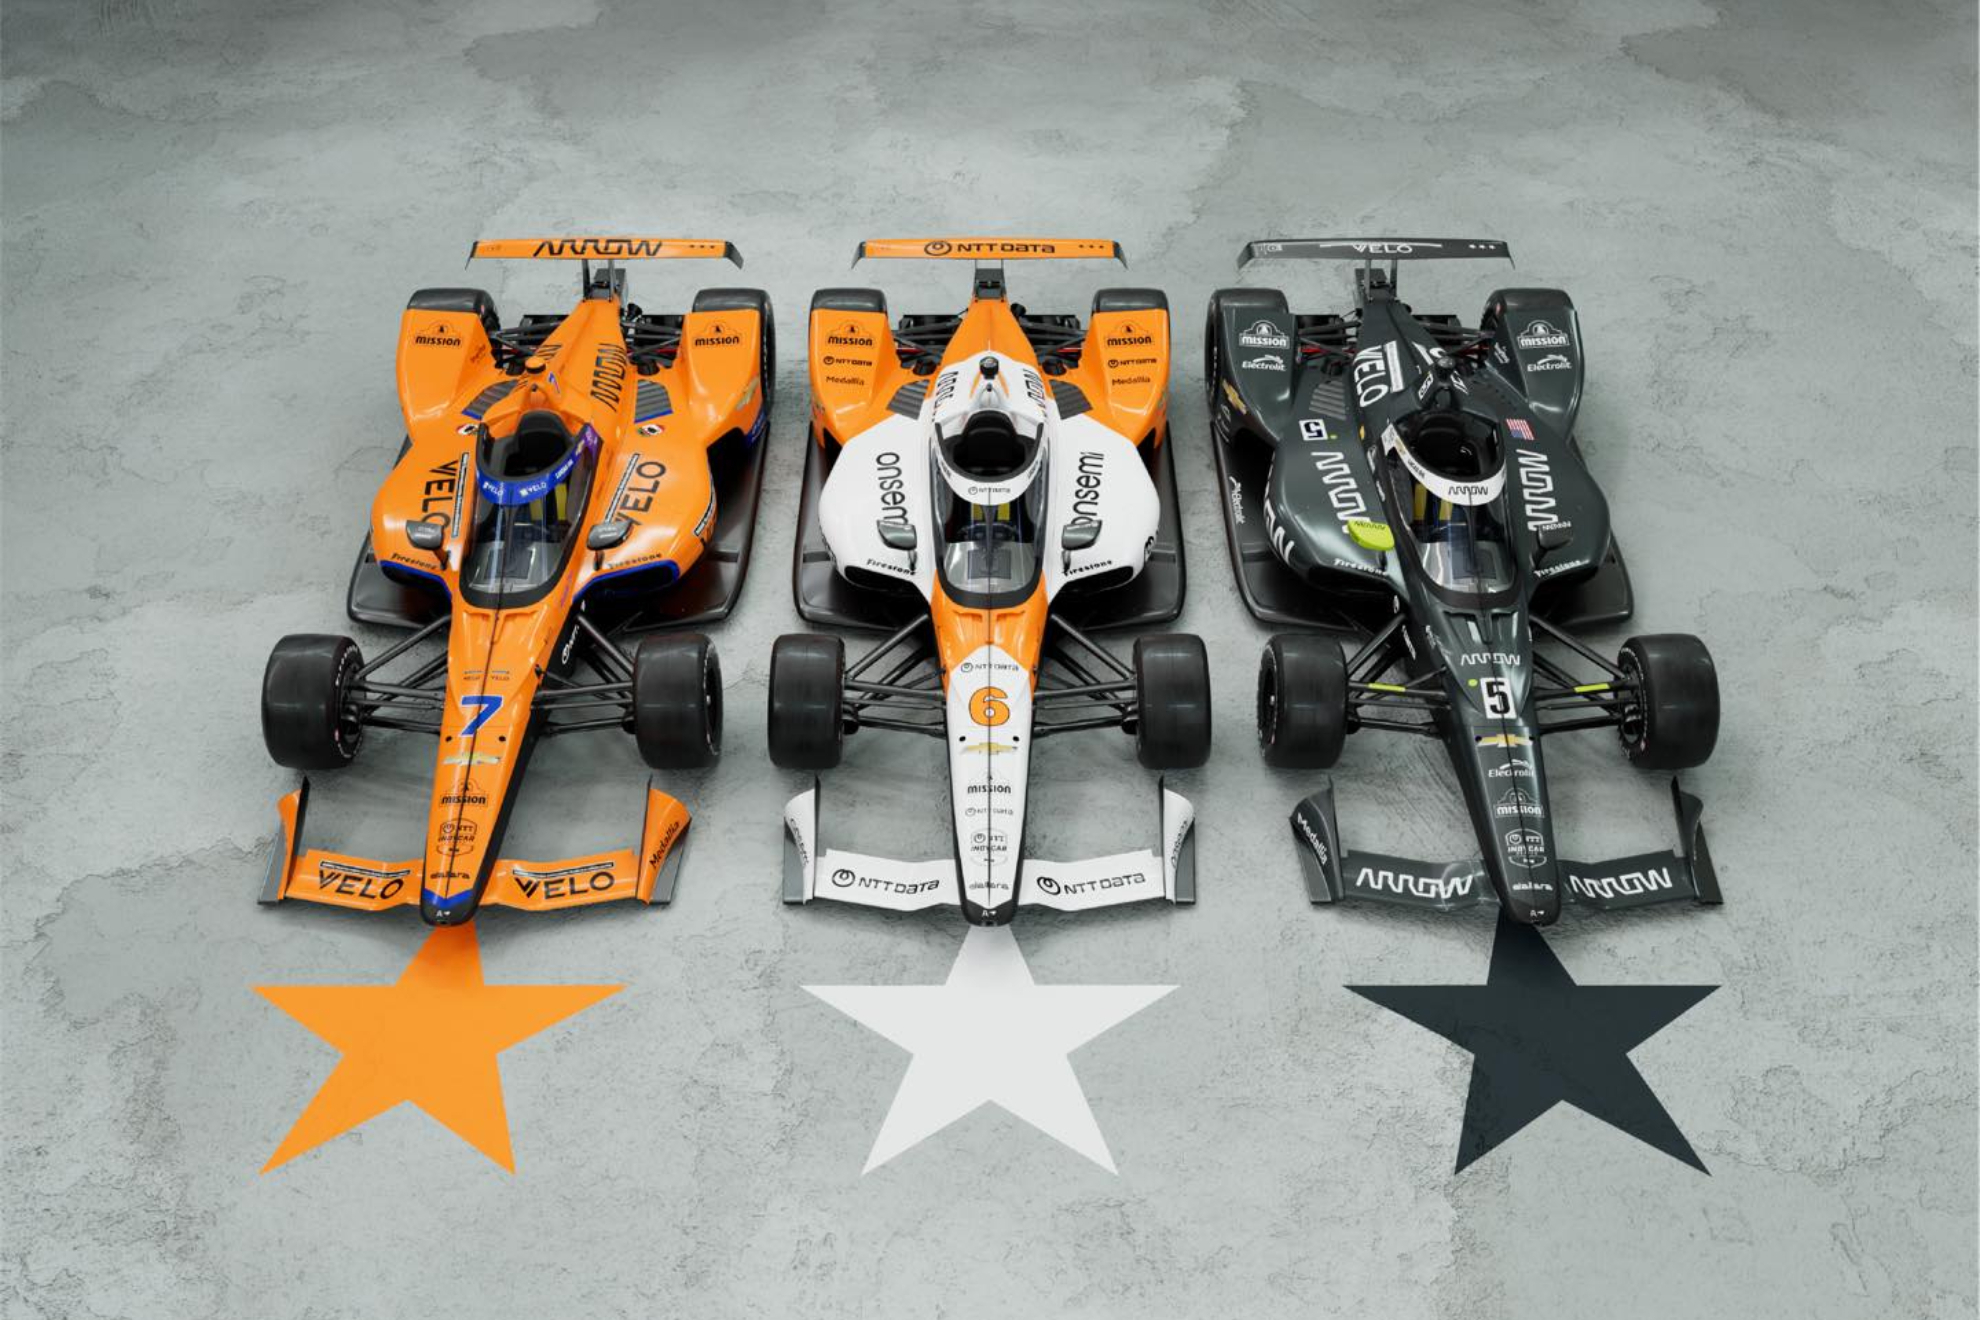 McLaren will pay tribute to their special Triple Crown at the Indy 500